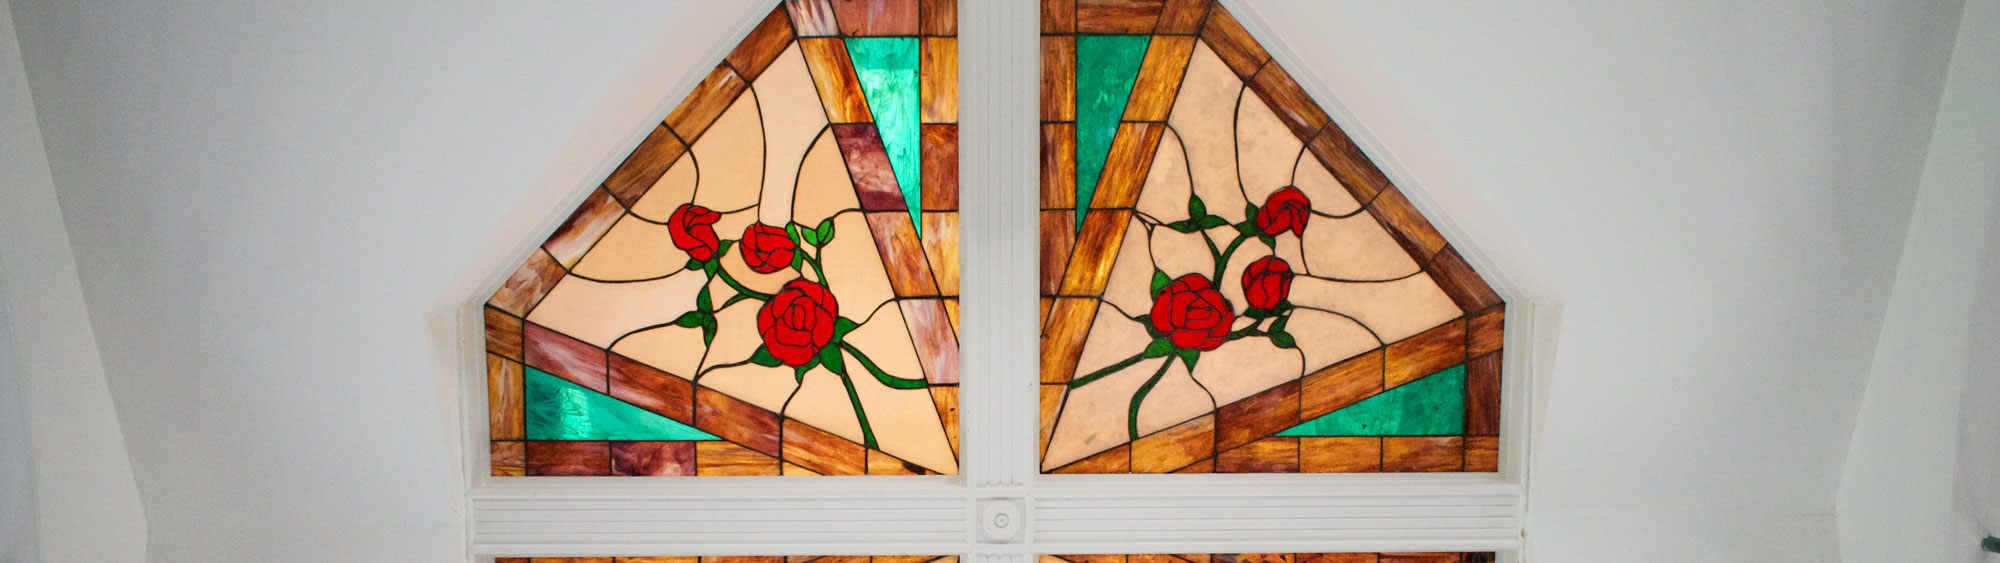 stained glass artwork in the ceiling of The Rosewood Ballroom